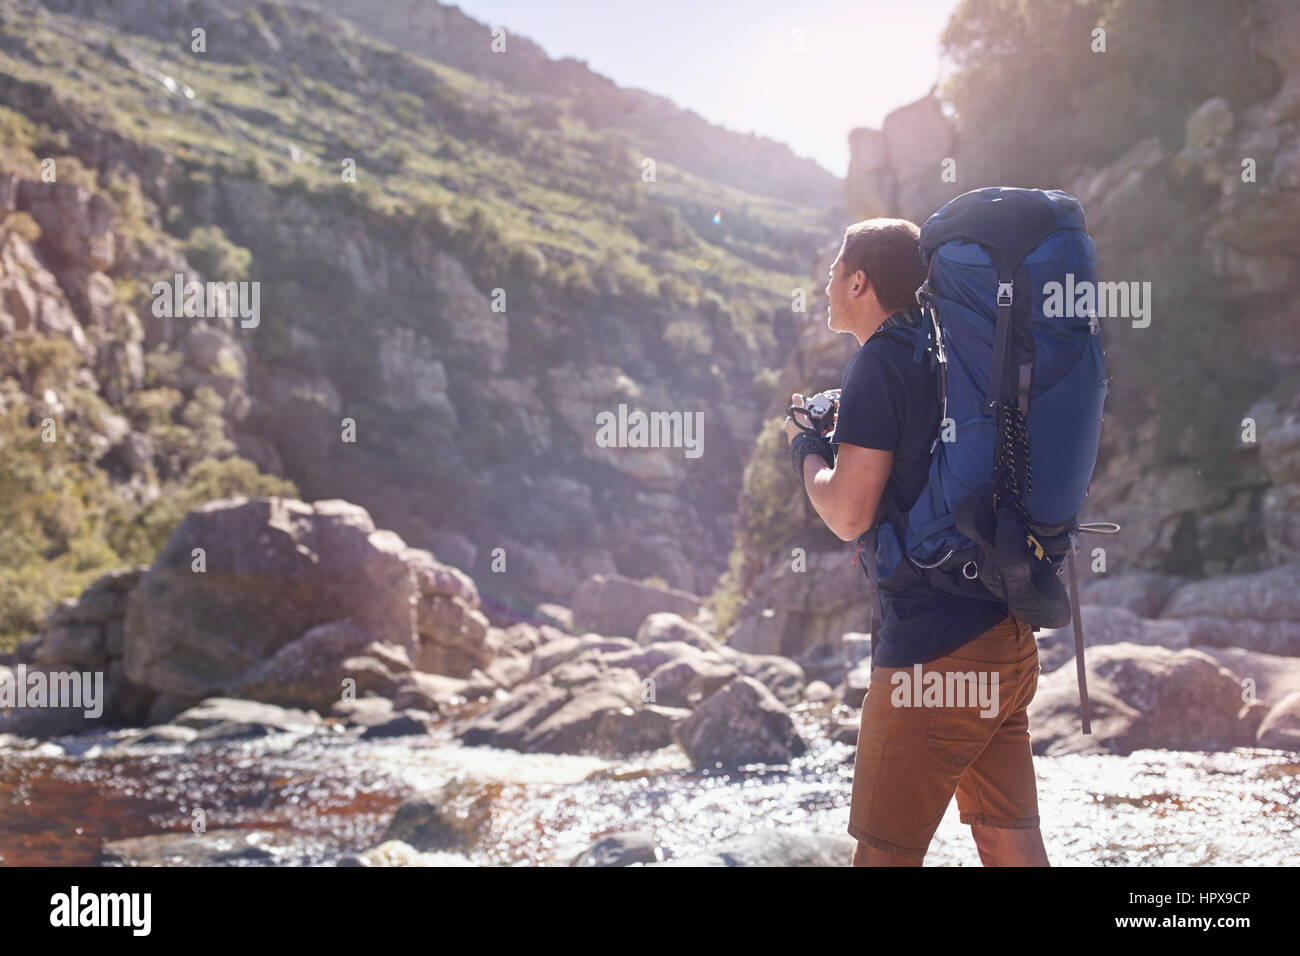 Young man with backpack hiking photographing with camera below sunny, remote cliffs Stock Photo